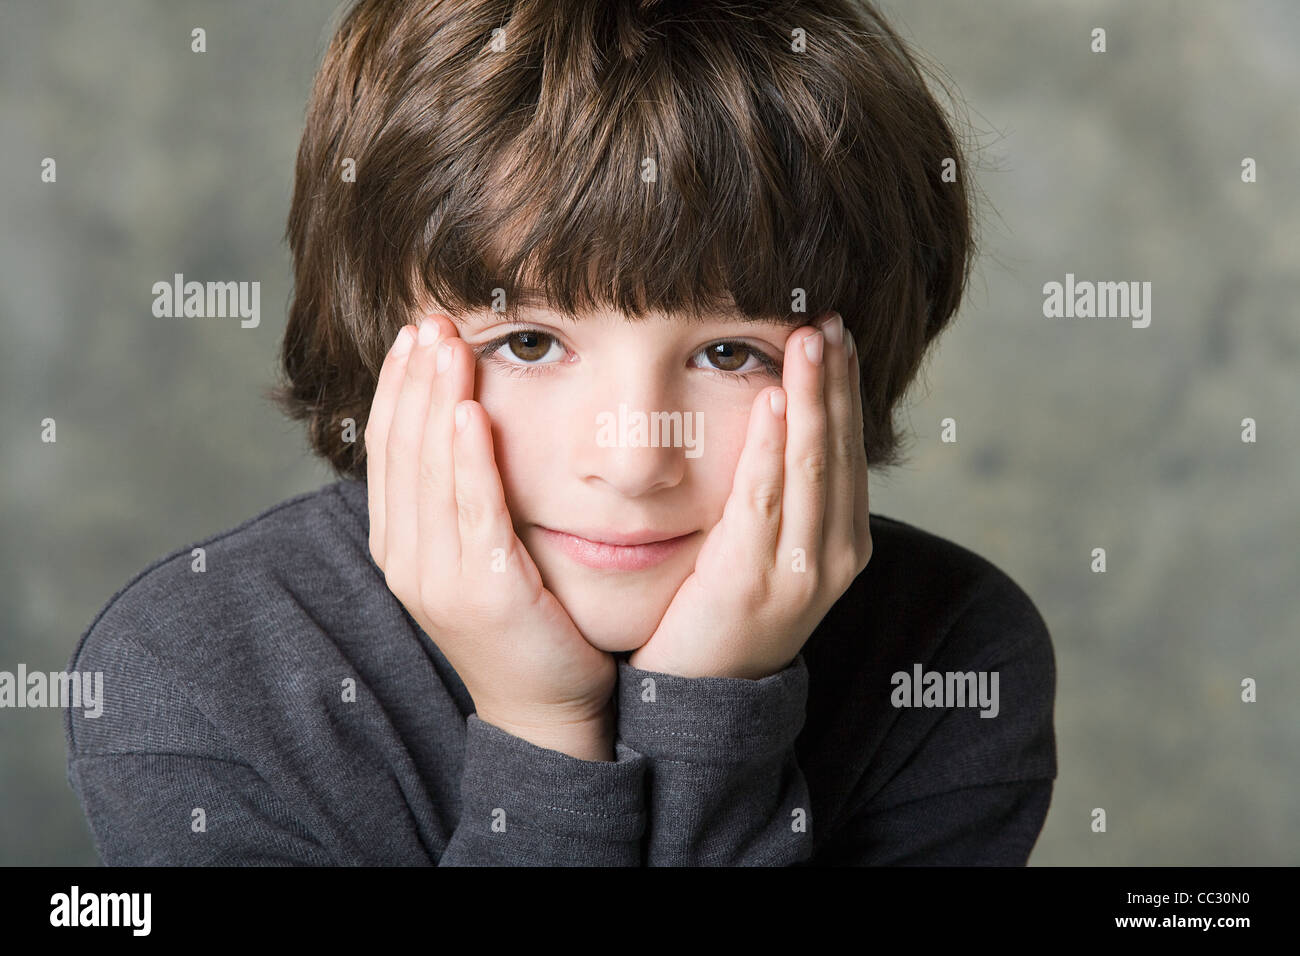 Portrait of boy (6-7) with face in hands, studio shot Stock Photo